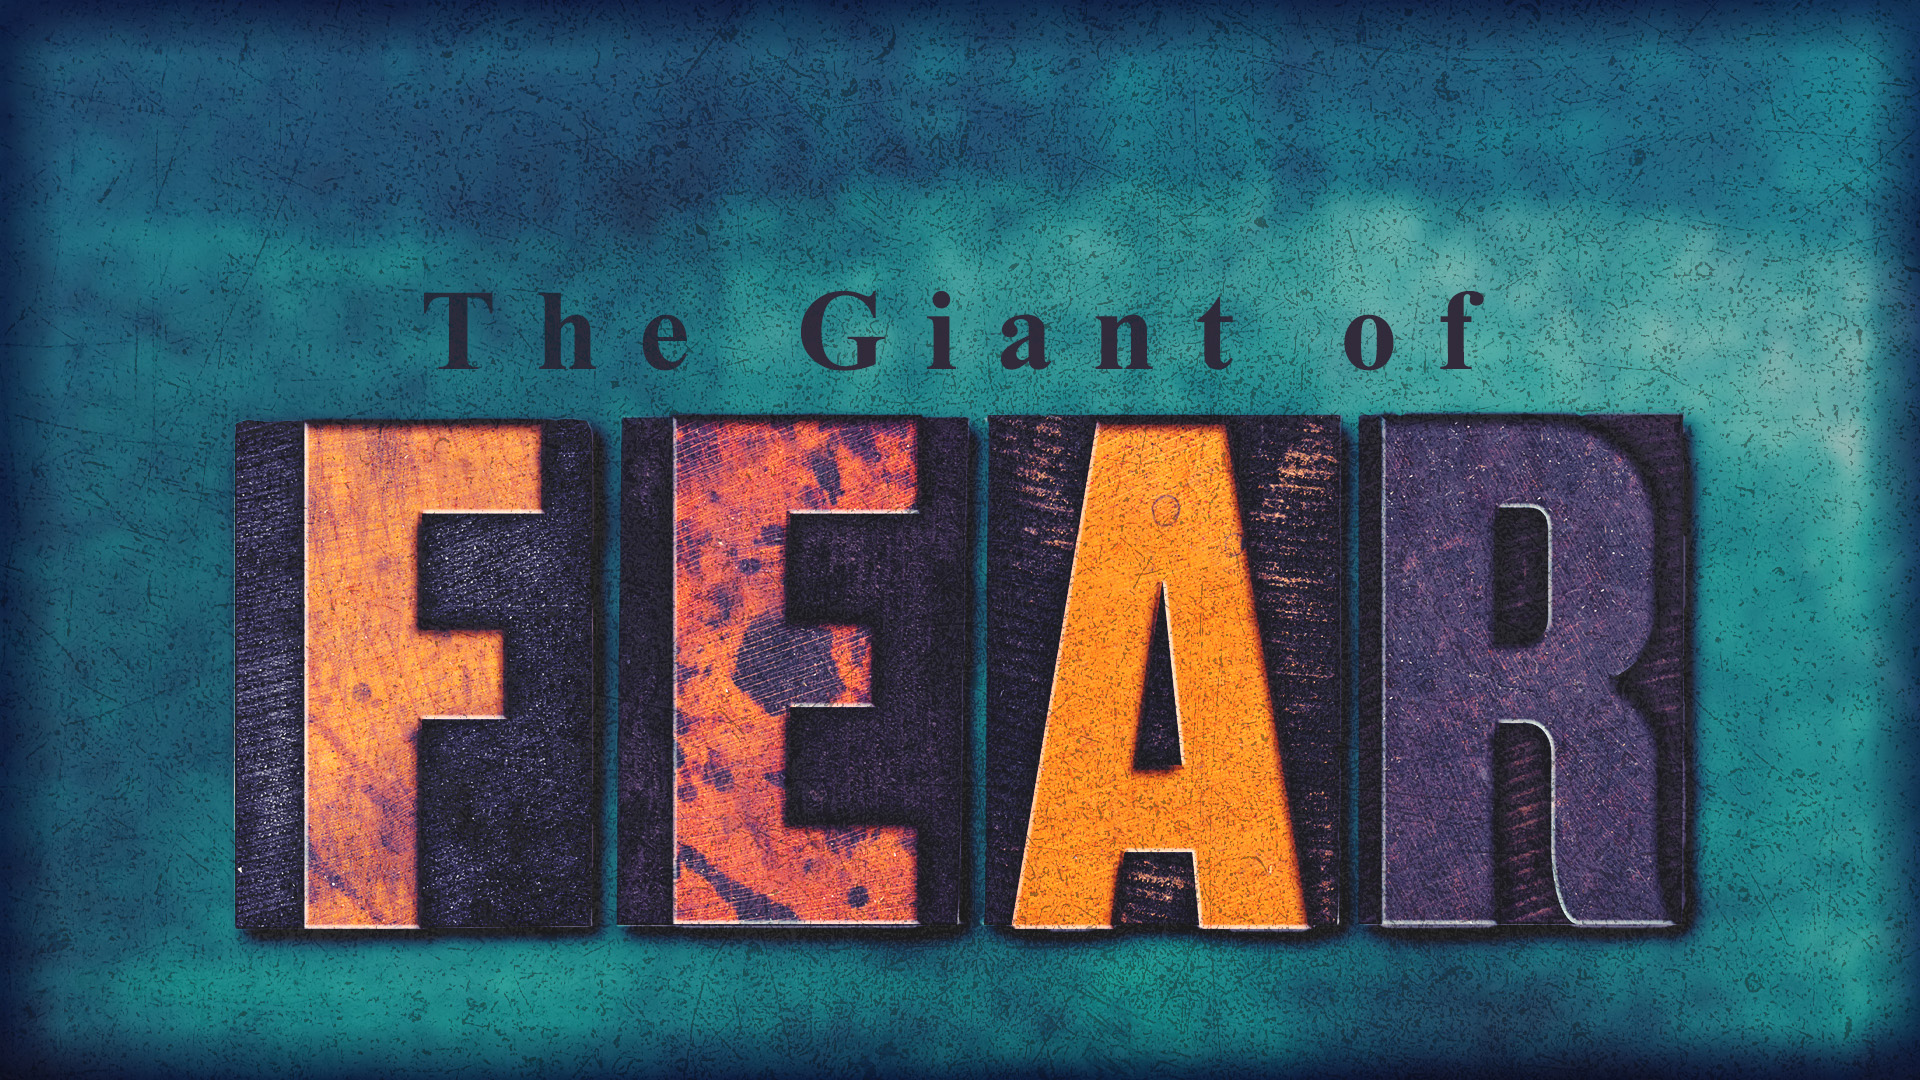 The Giant of Fear